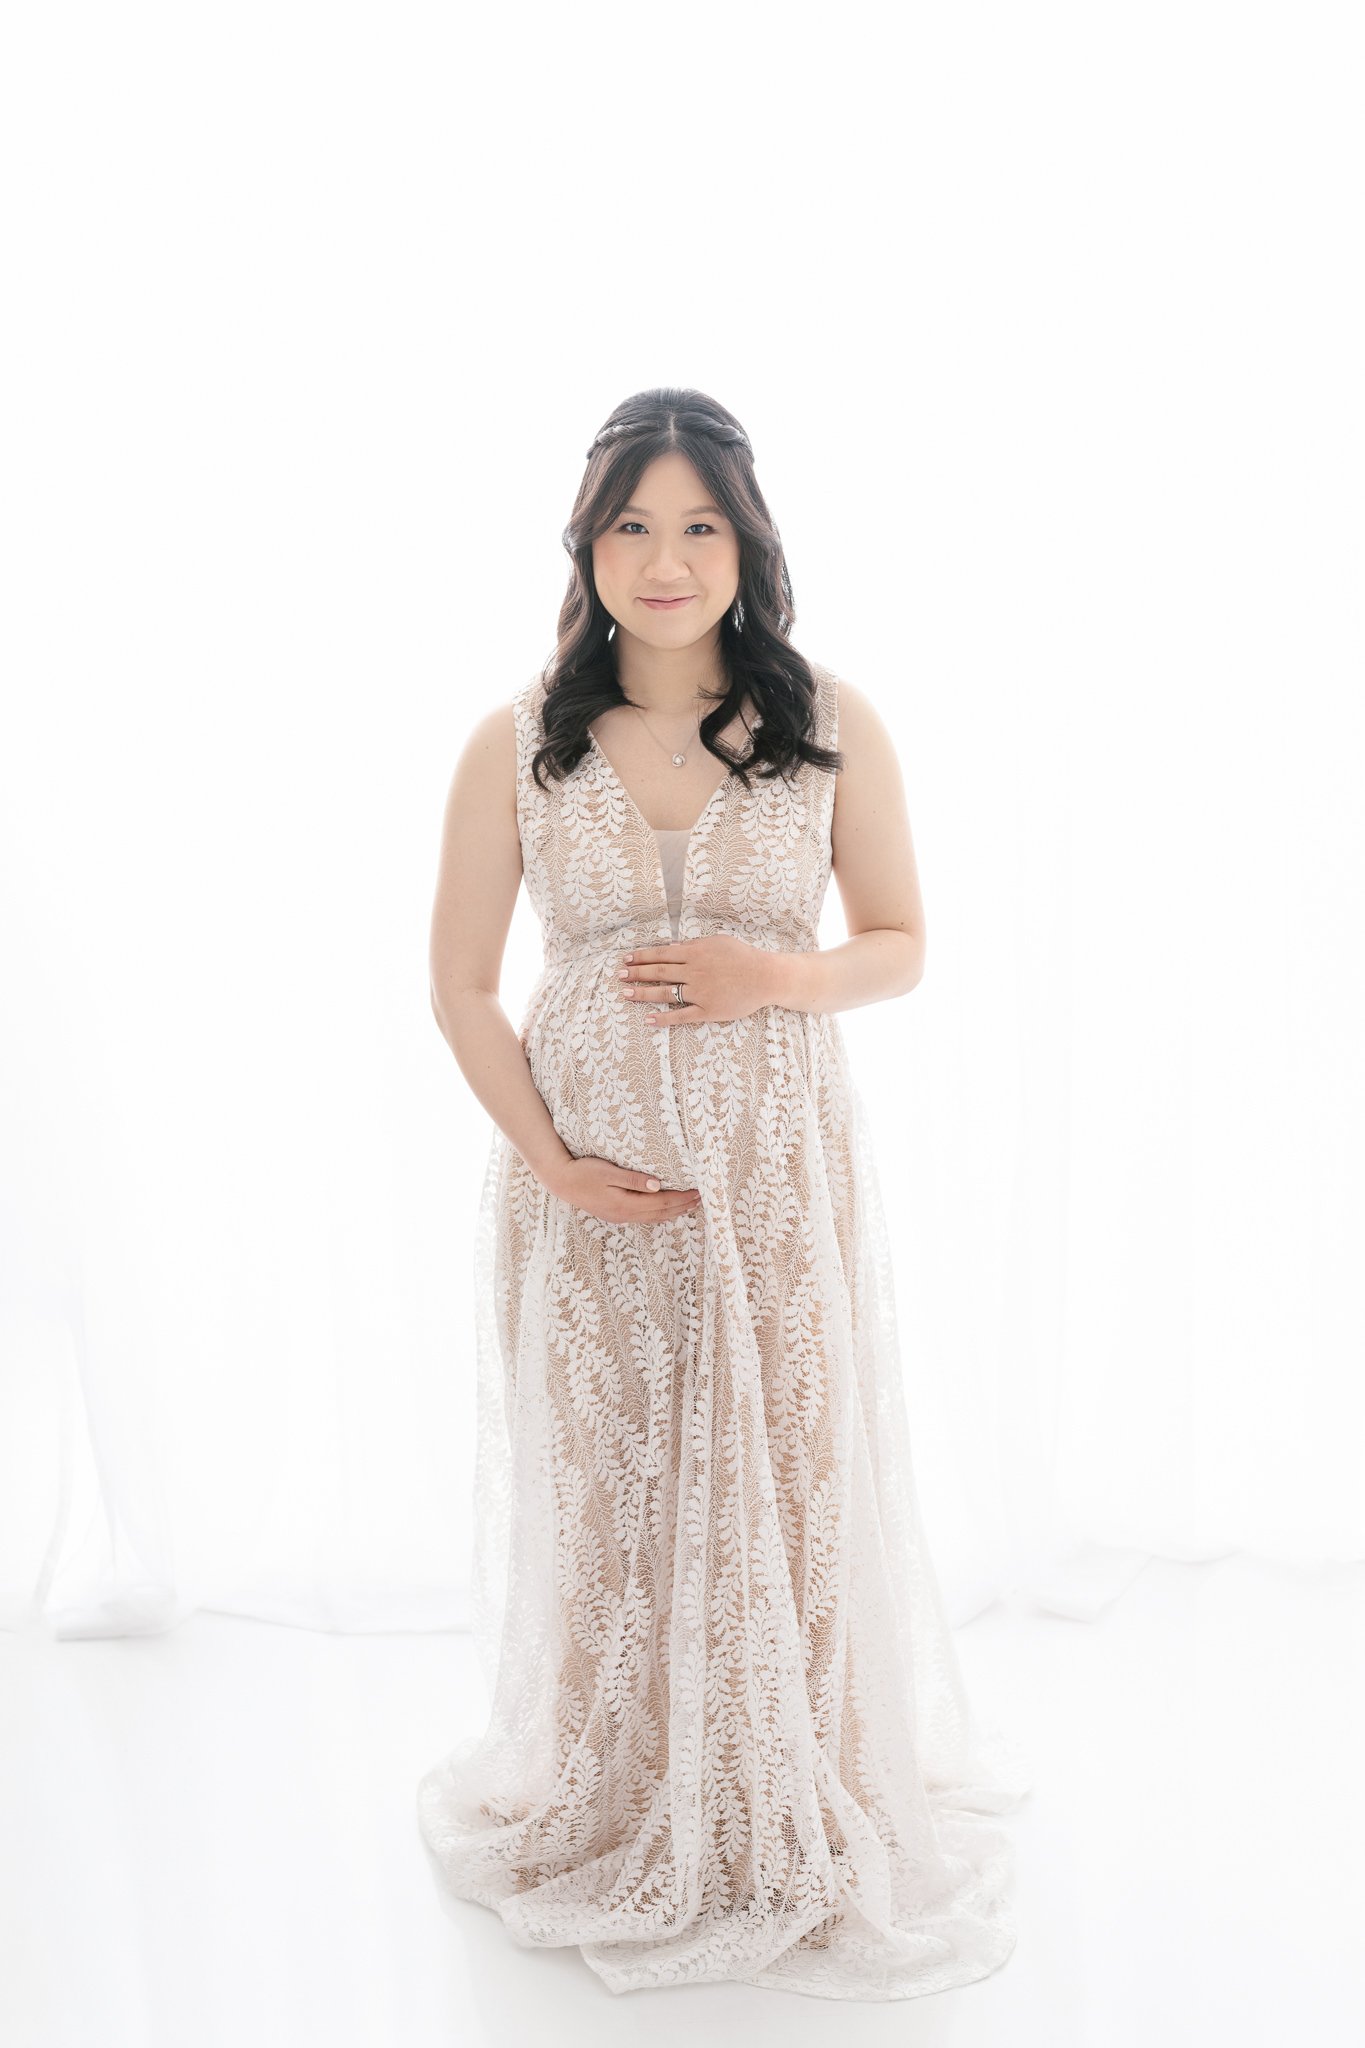  A new mother holds her maternity bump in her arms and looks forward in a studio by Nicole Hawkins Photography. maternity style ideas flattering maternity gowns #NicoleHawkinsPhotography #NicoleHawkinsMaternity #MaternityPhotography #Maternitystyle #